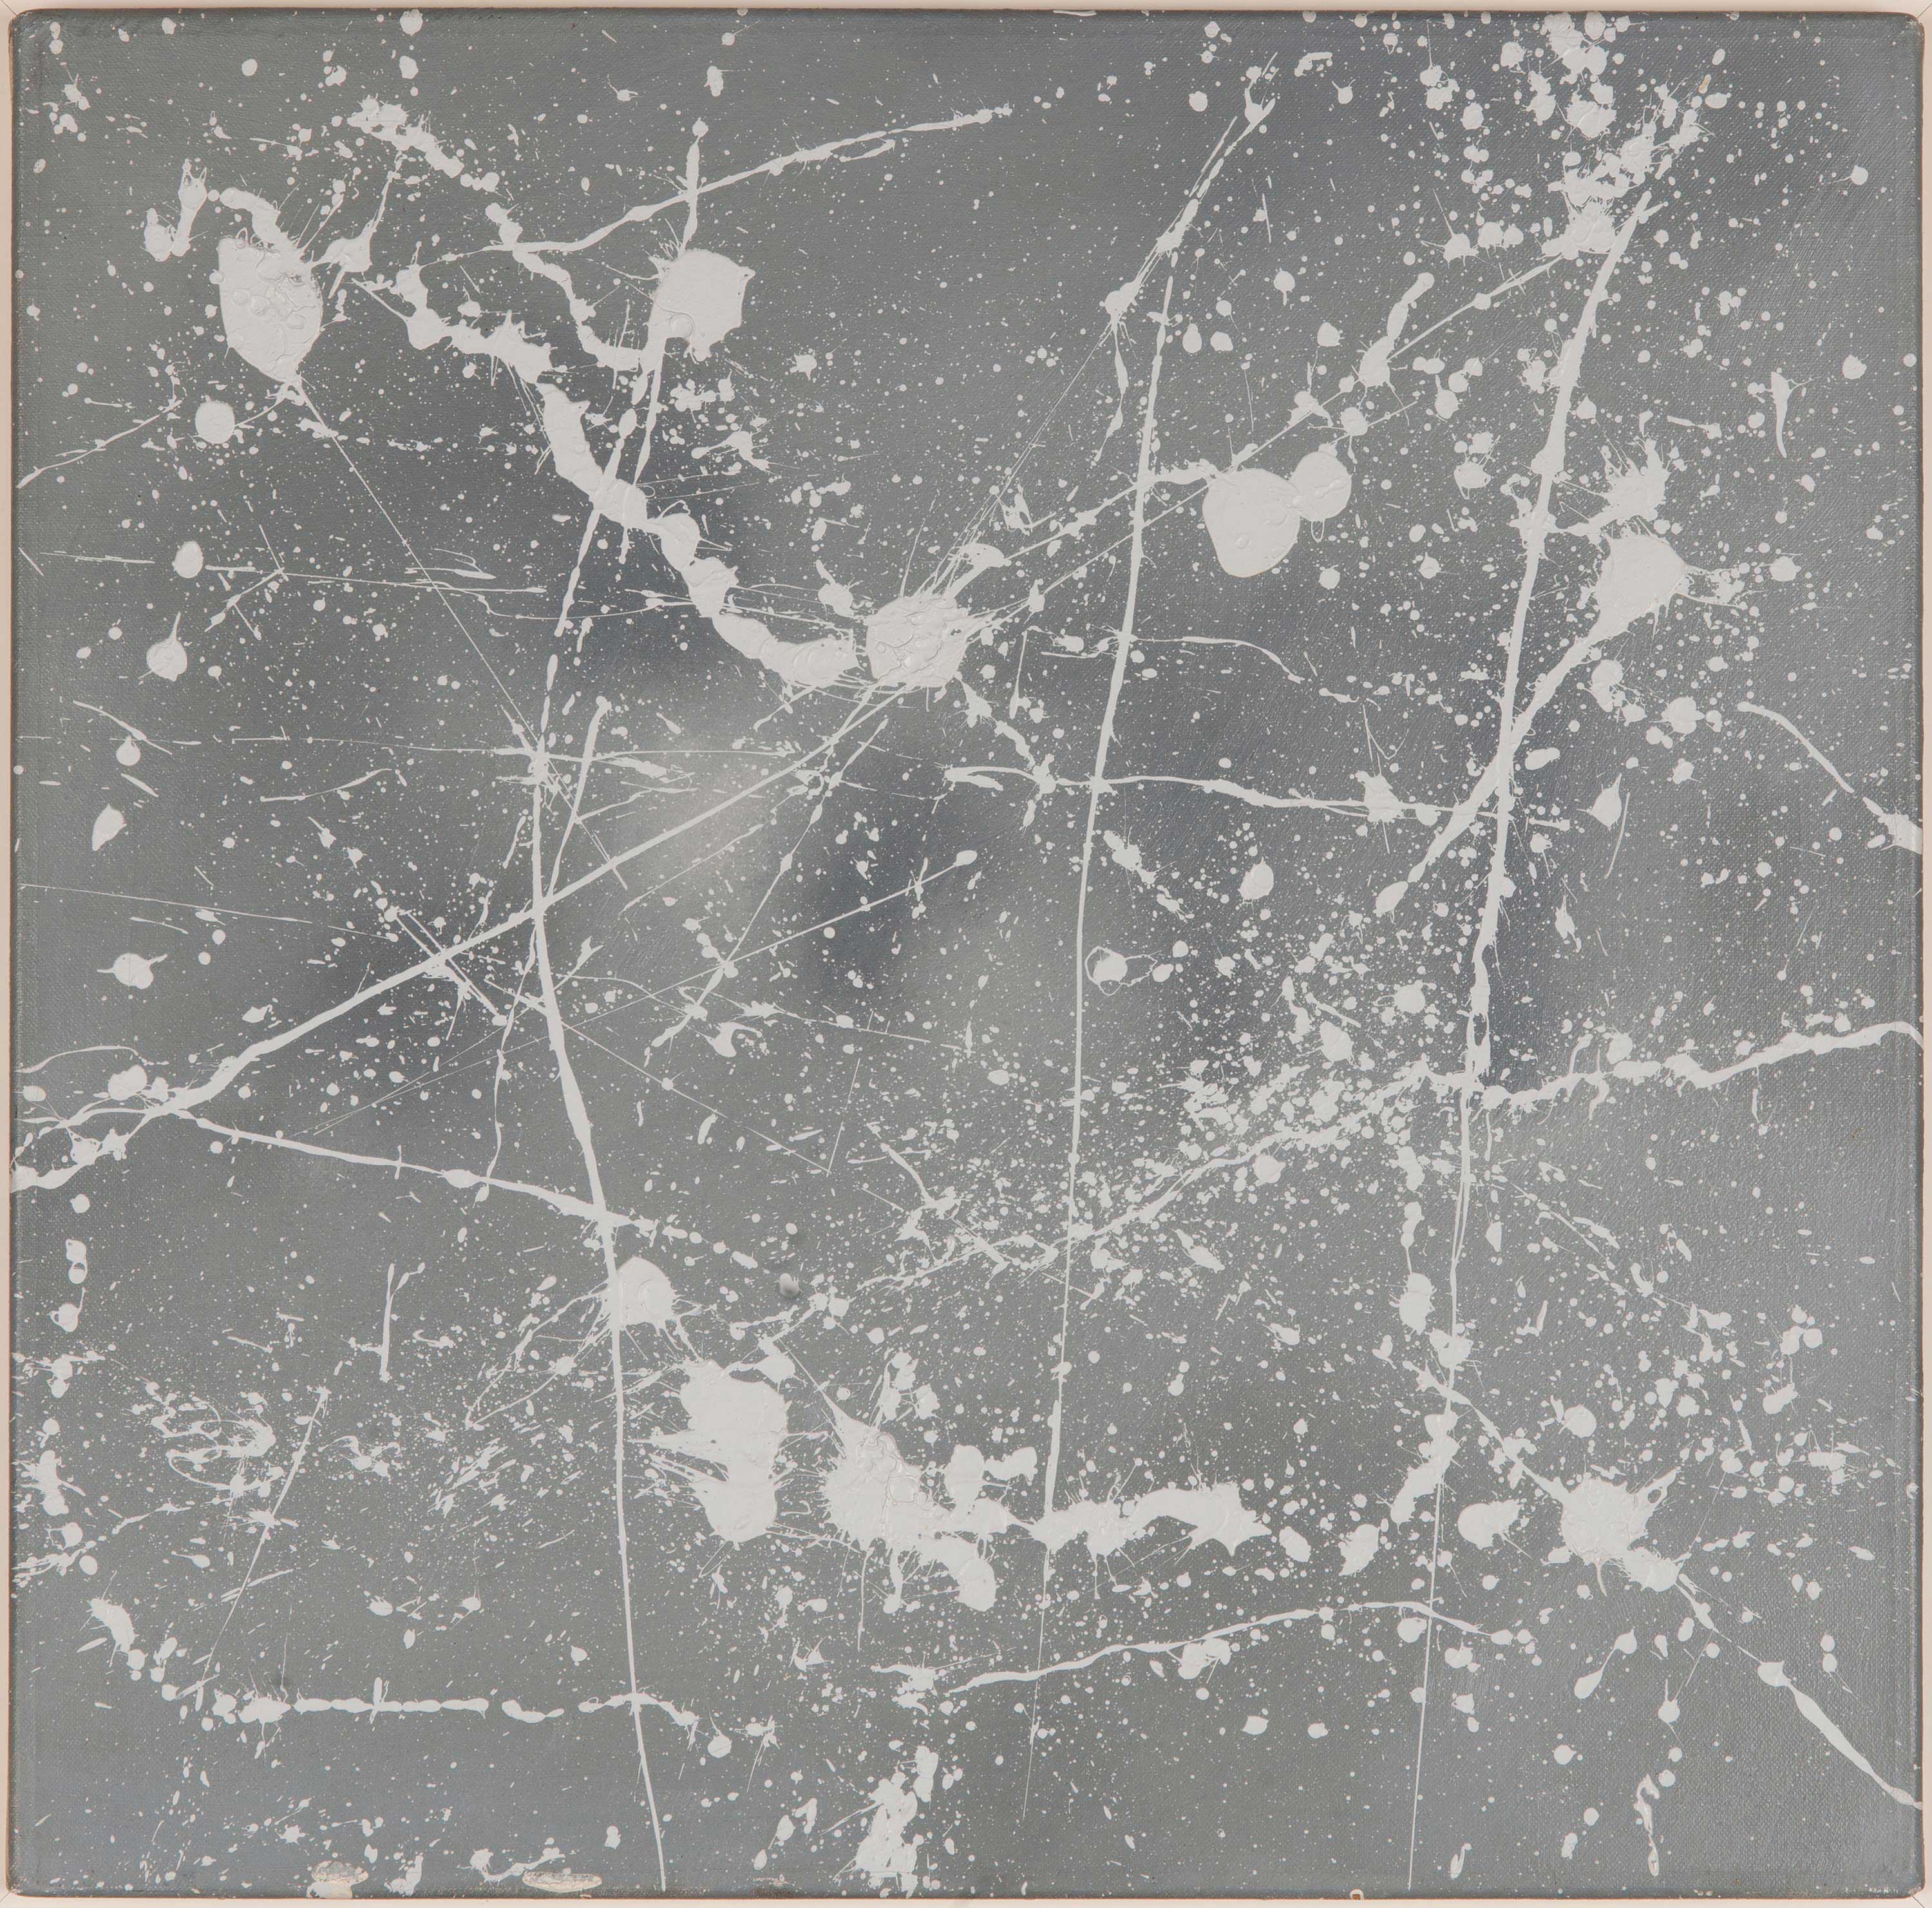 An abstract painting of random white splatters on a black background.